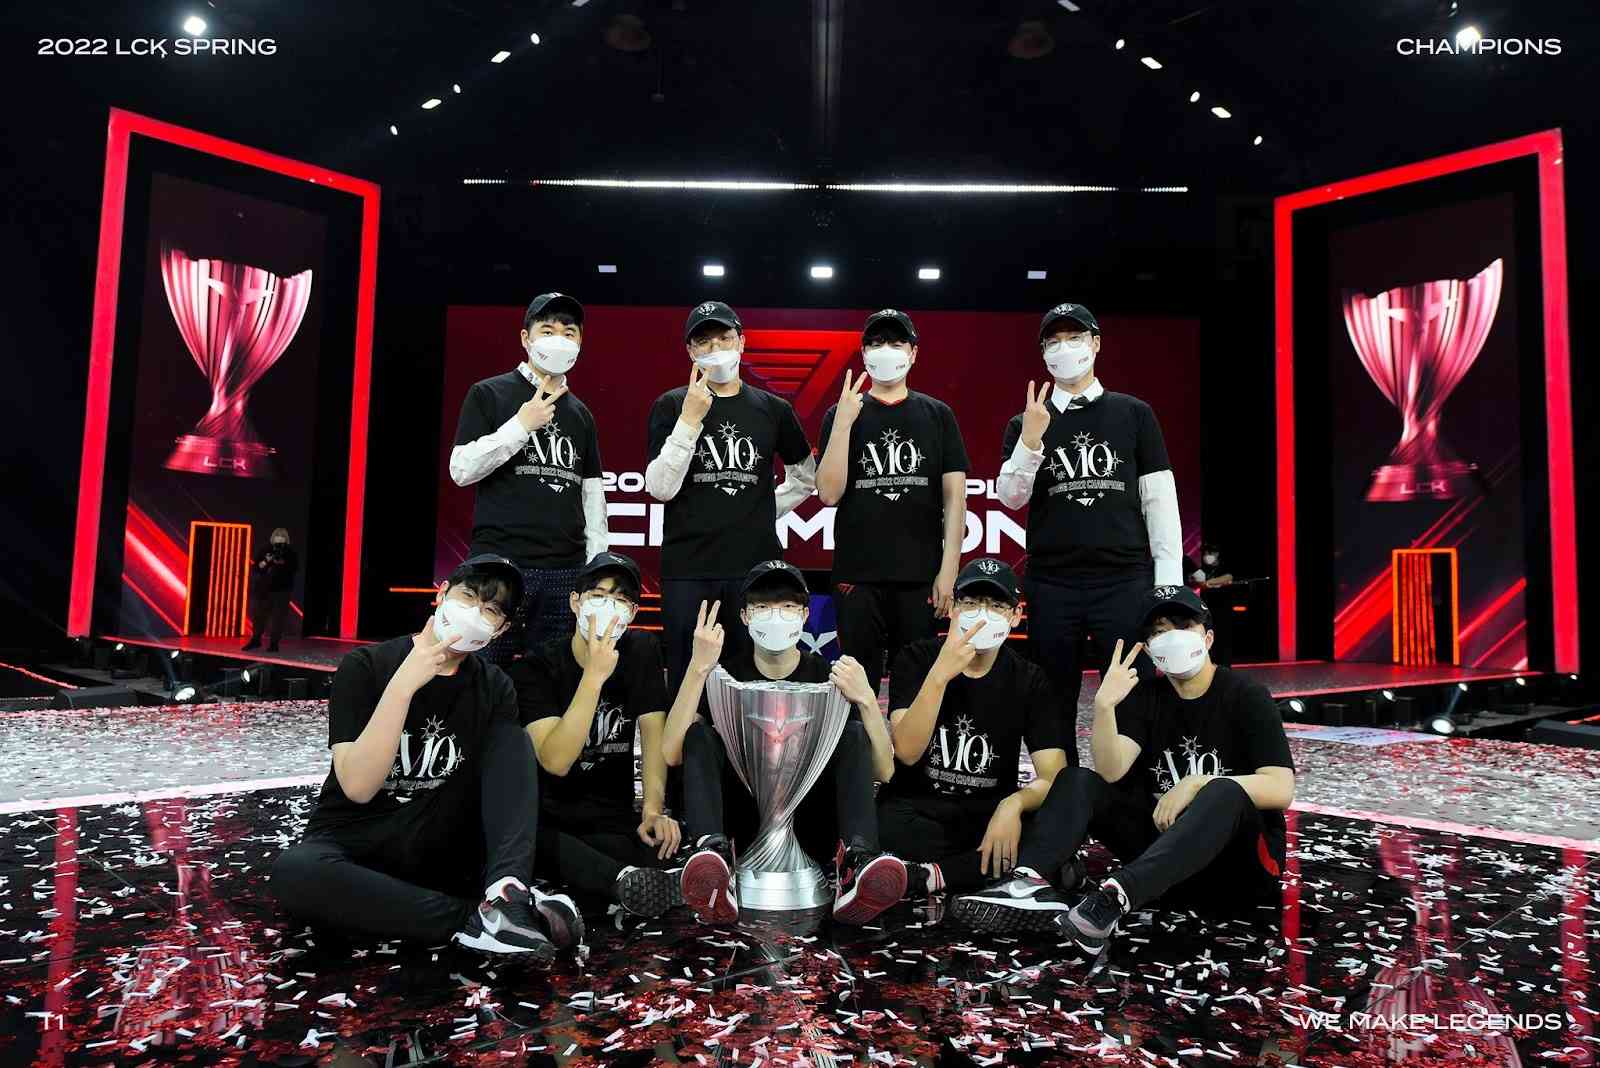 T1’s team picture following their 10th LCK title win. | Image via LCK on Twitter